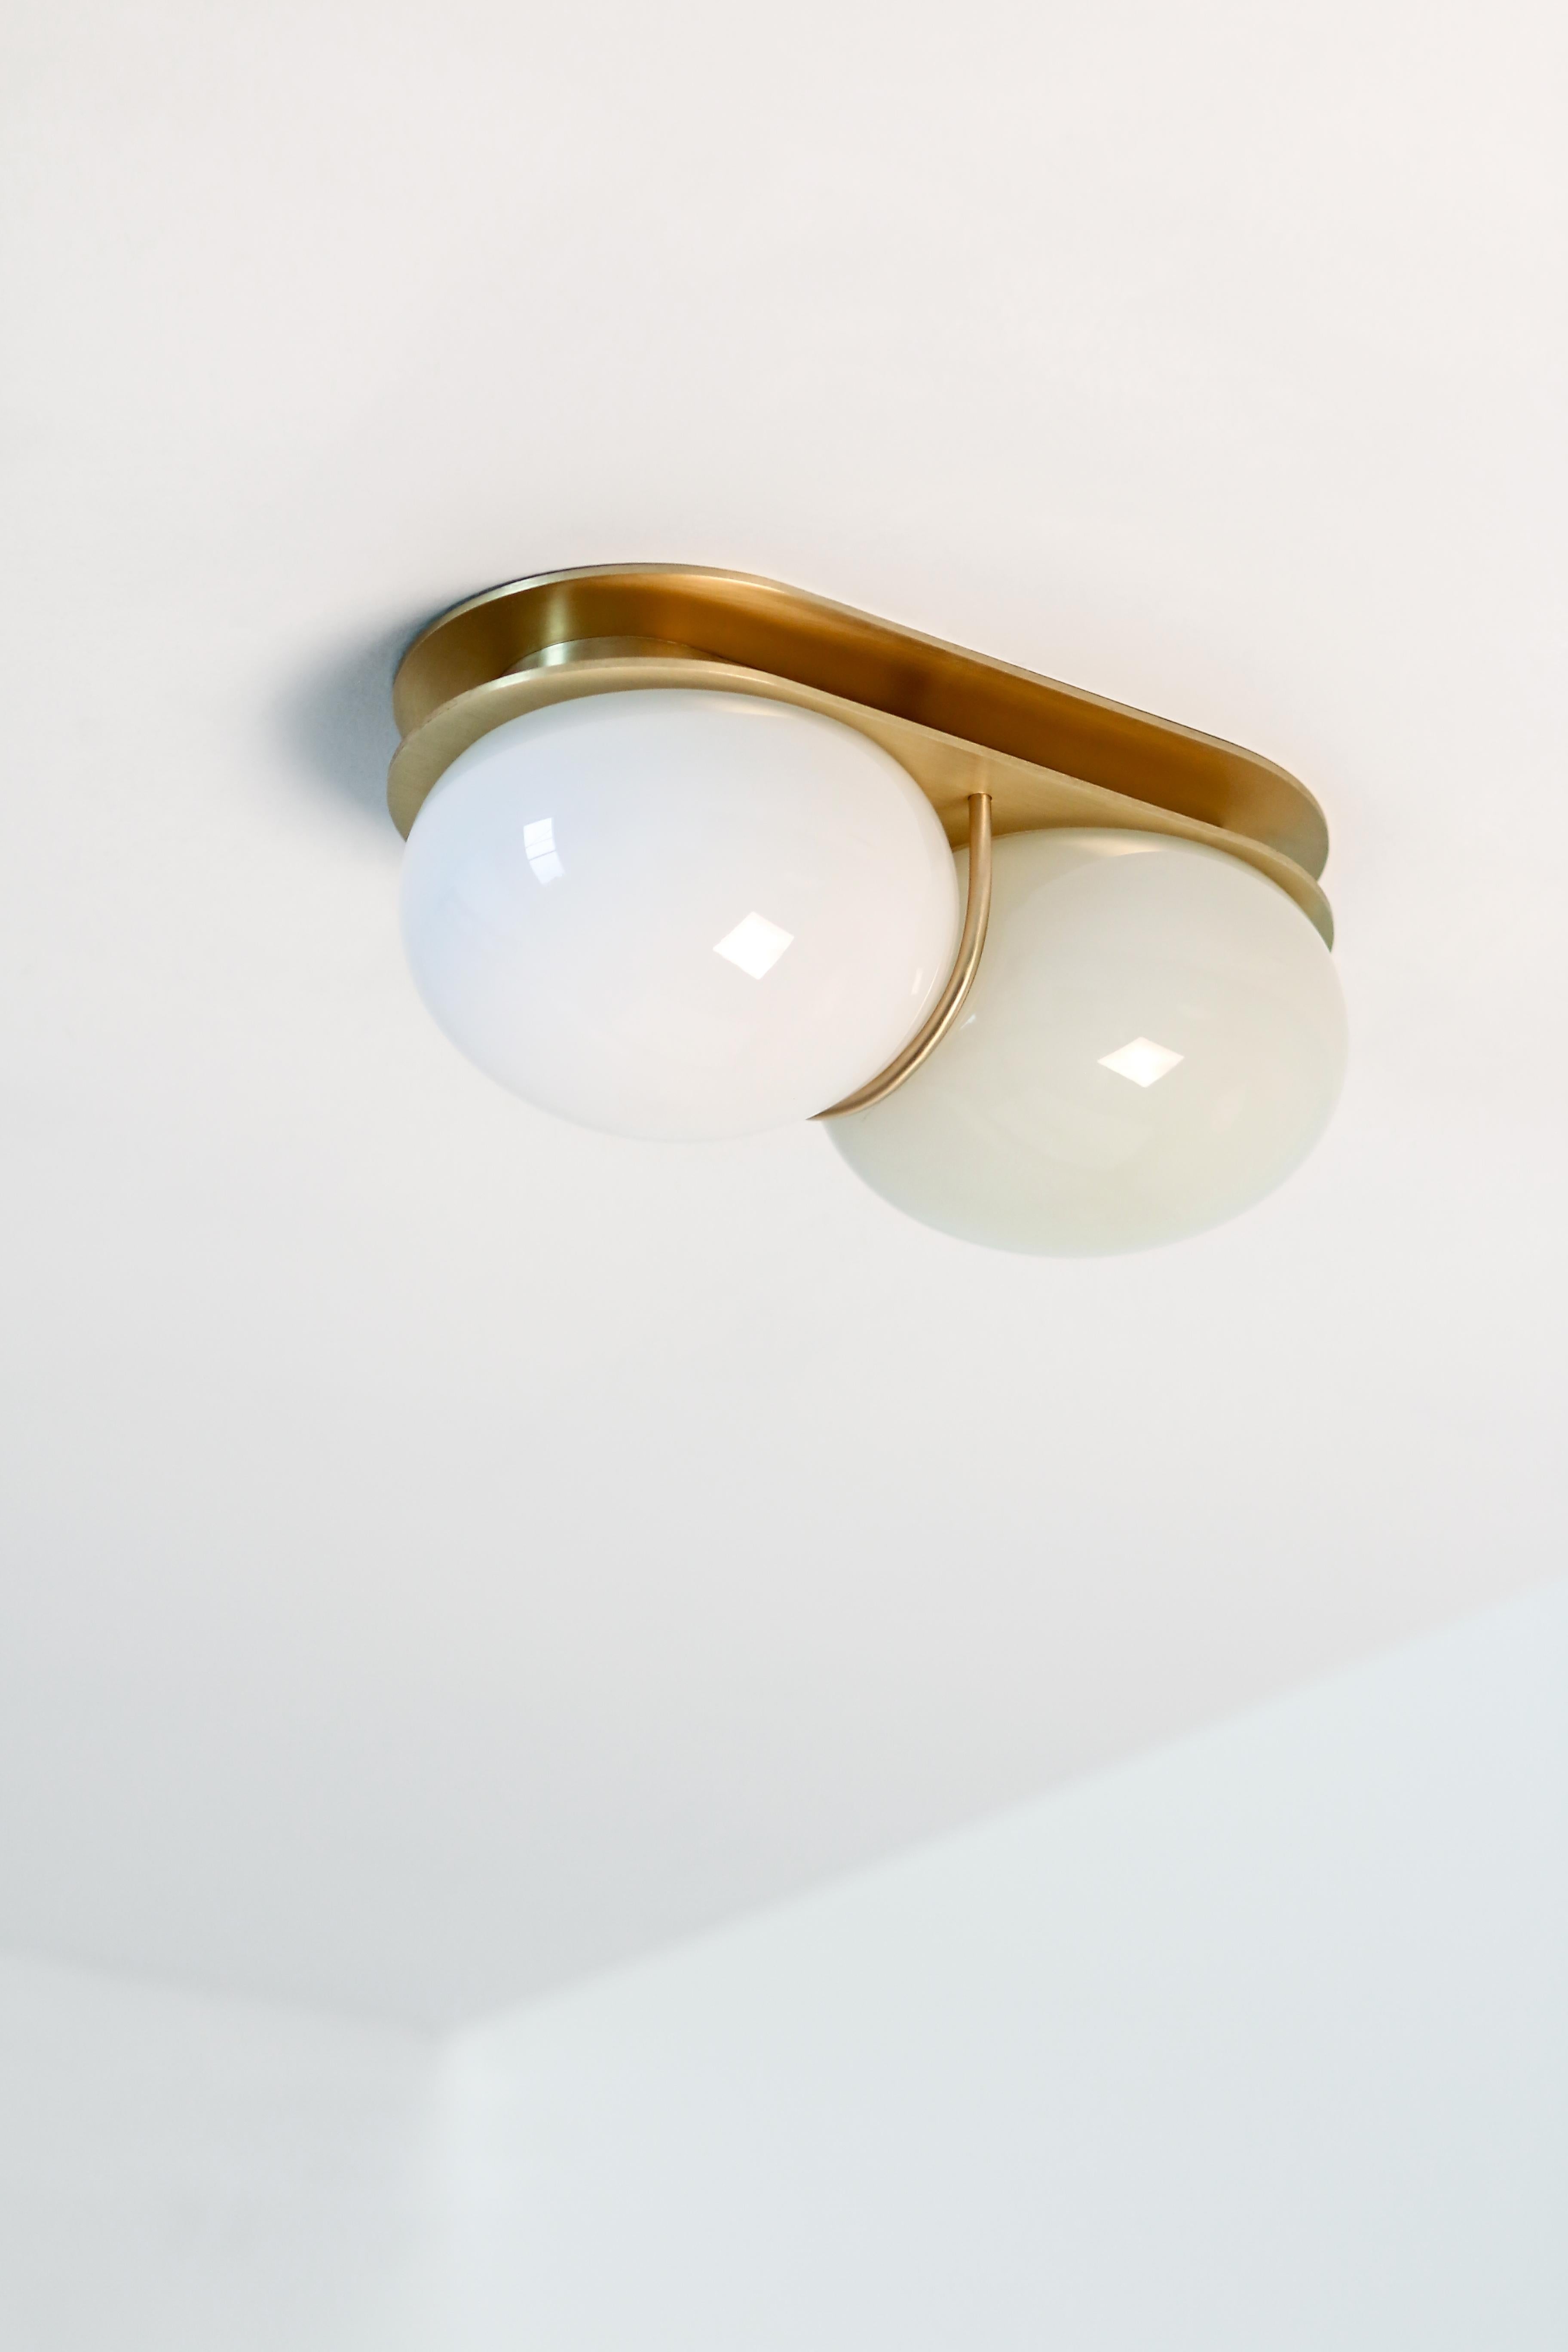 White twin 2.0 sconce by SkLO
Dimensions: D 12.7 x W 15 x H 28 cm
Materials: glass, brass
Available in blue, mint green, oyster, pastel pink and white palette.
Available in 4 metal finishes: dark oxidized, brushed brass, polished nickel, brushed